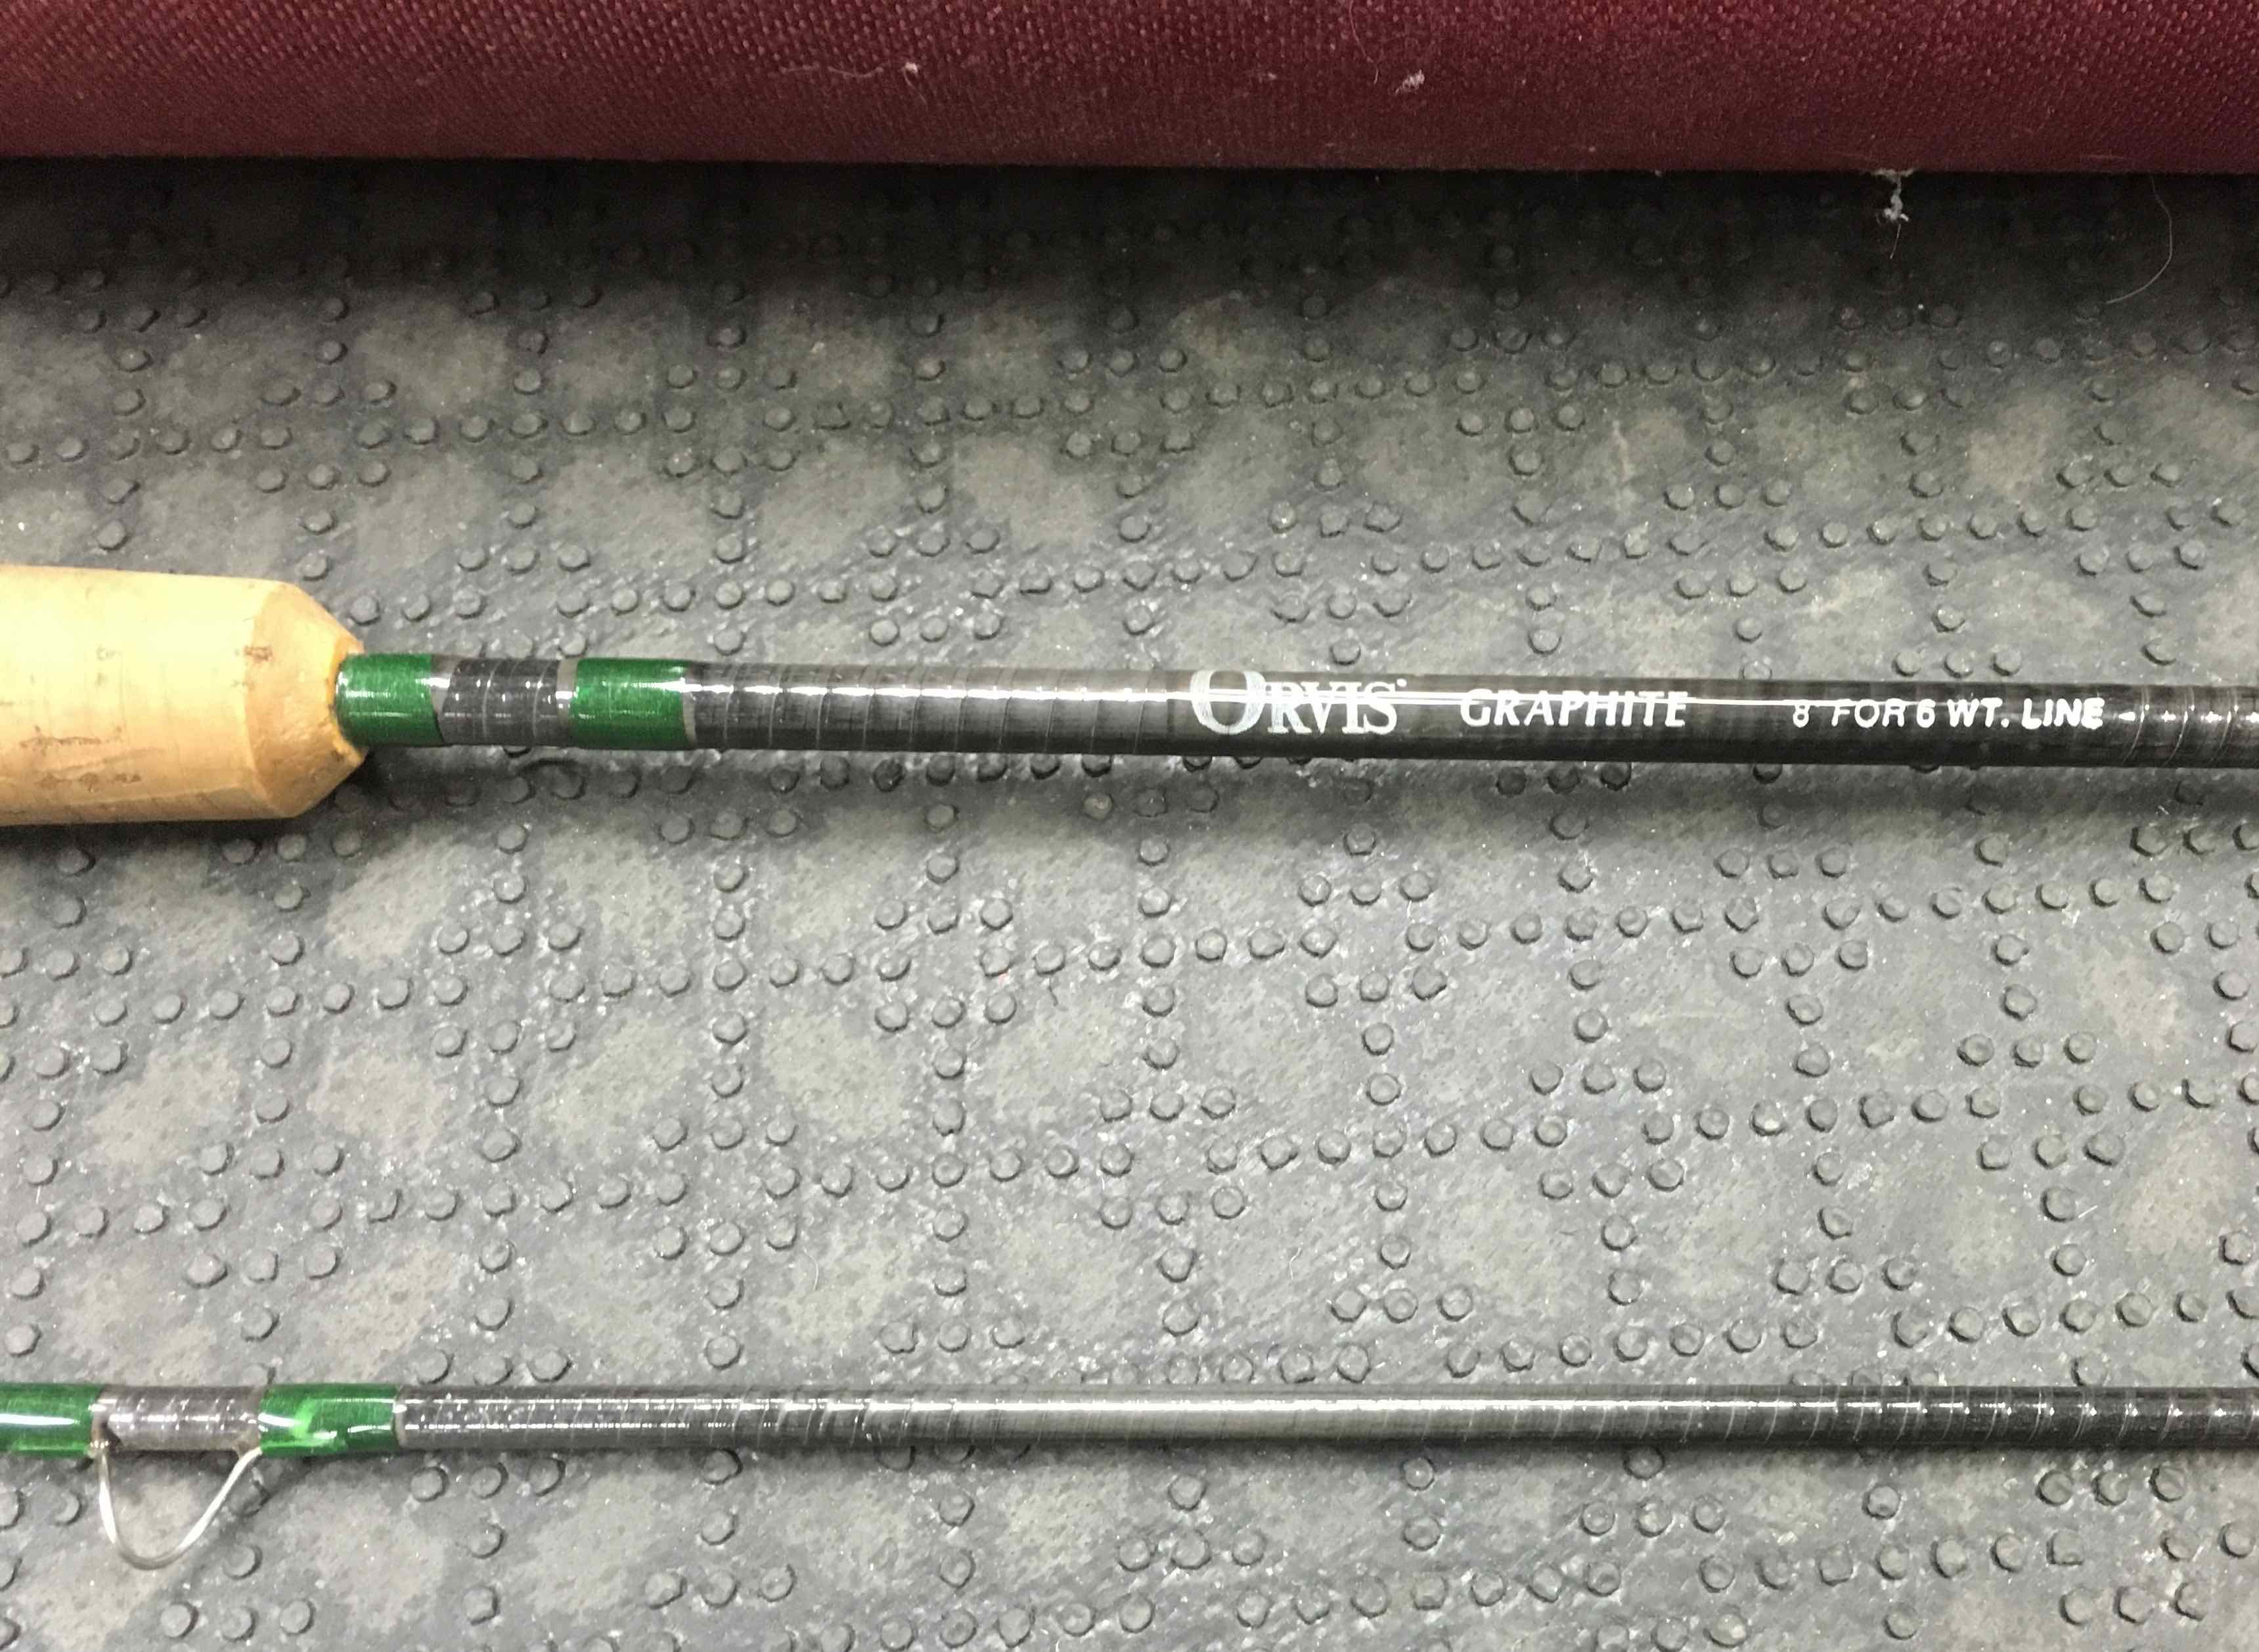 SOLD! – Orvis Graphite Fly Rod – 8′ 6wt – 2pc – $50 – The First